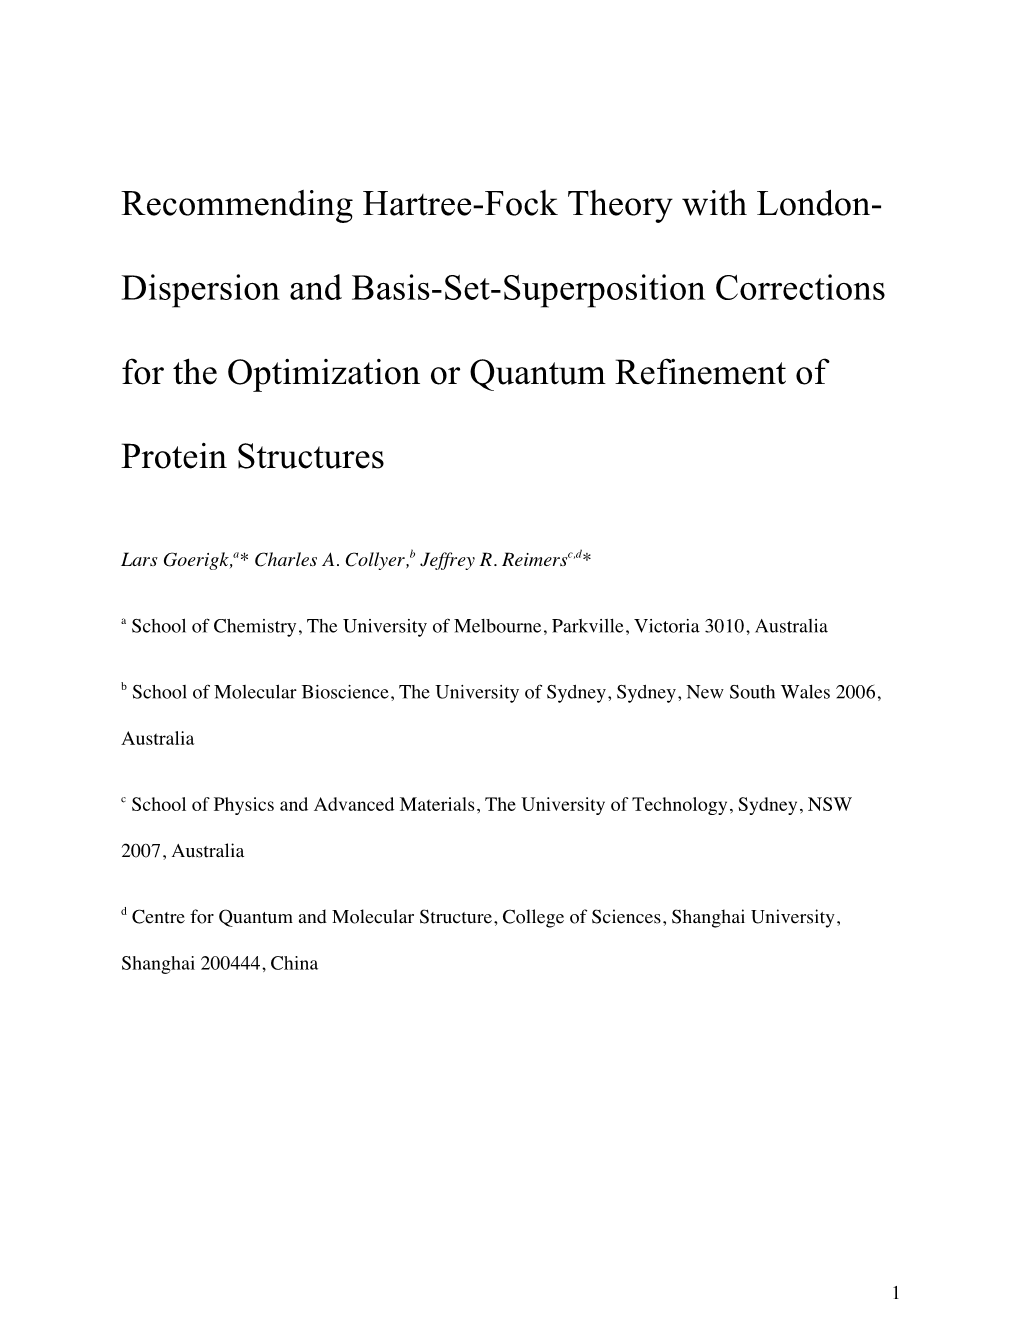 Recommending Hartree-Fock Theory with London- Dispersion and Basis